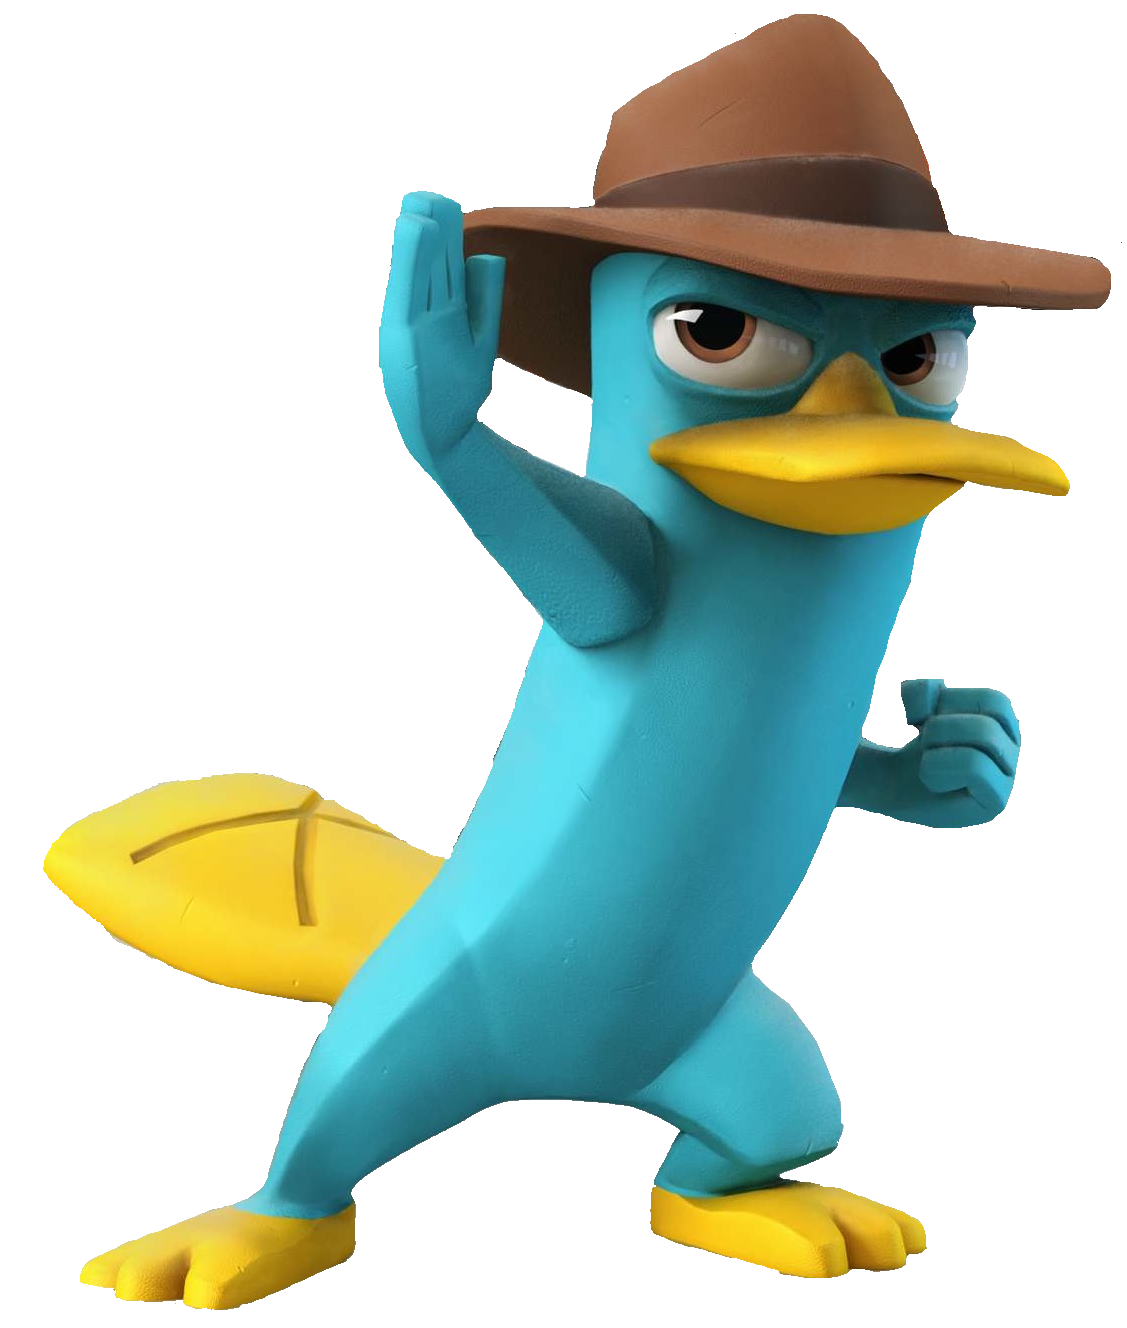 Image infinity perry the. Disney png images